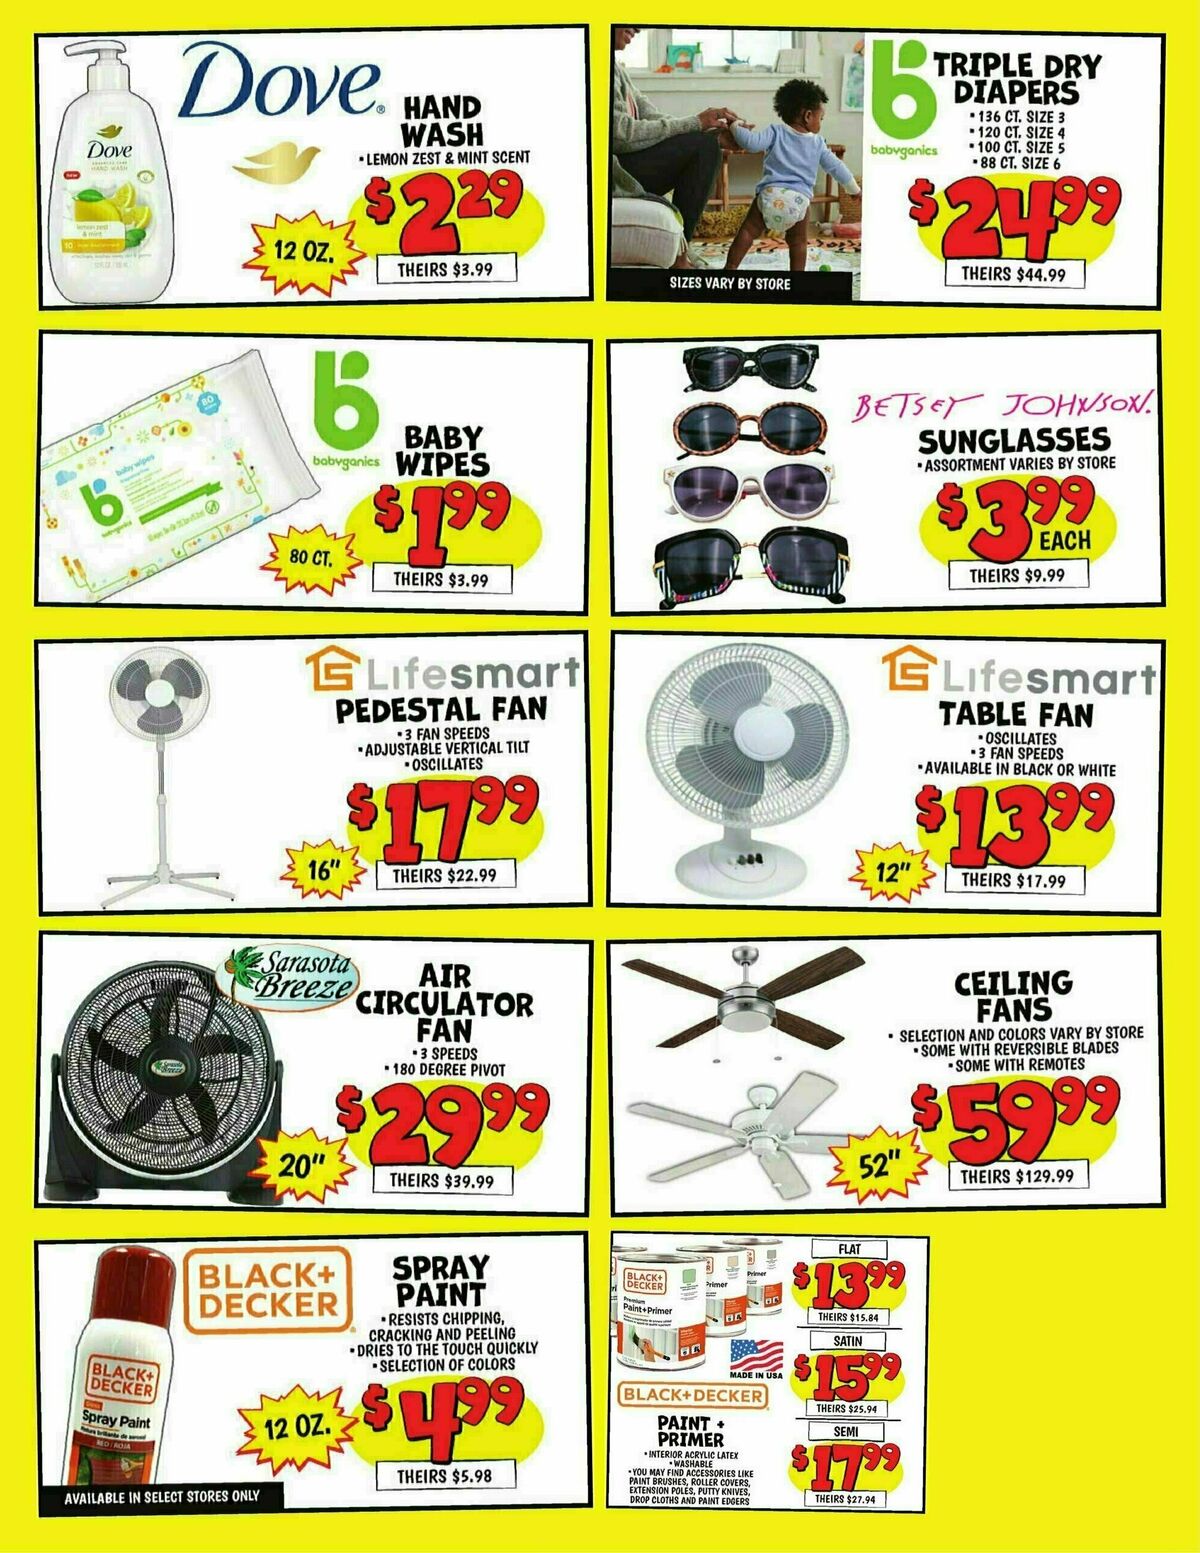 Ollie's Bargain Outlet Weekly Ad from March 28